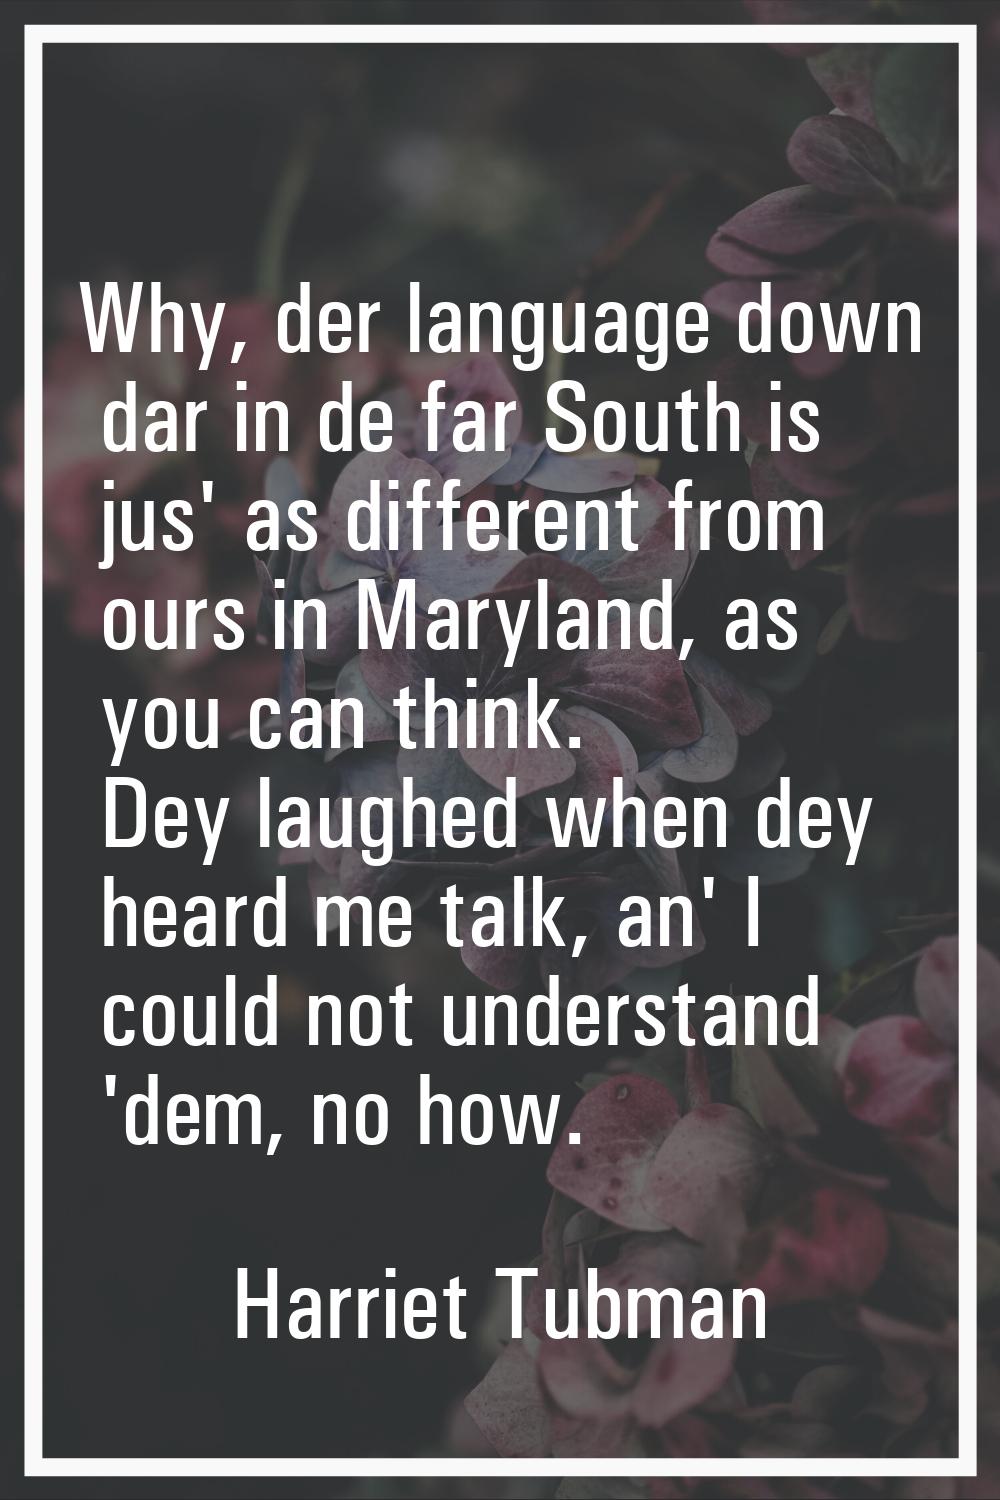 Why, der language down dar in de far South is jus' as different from ours in Maryland, as you can t